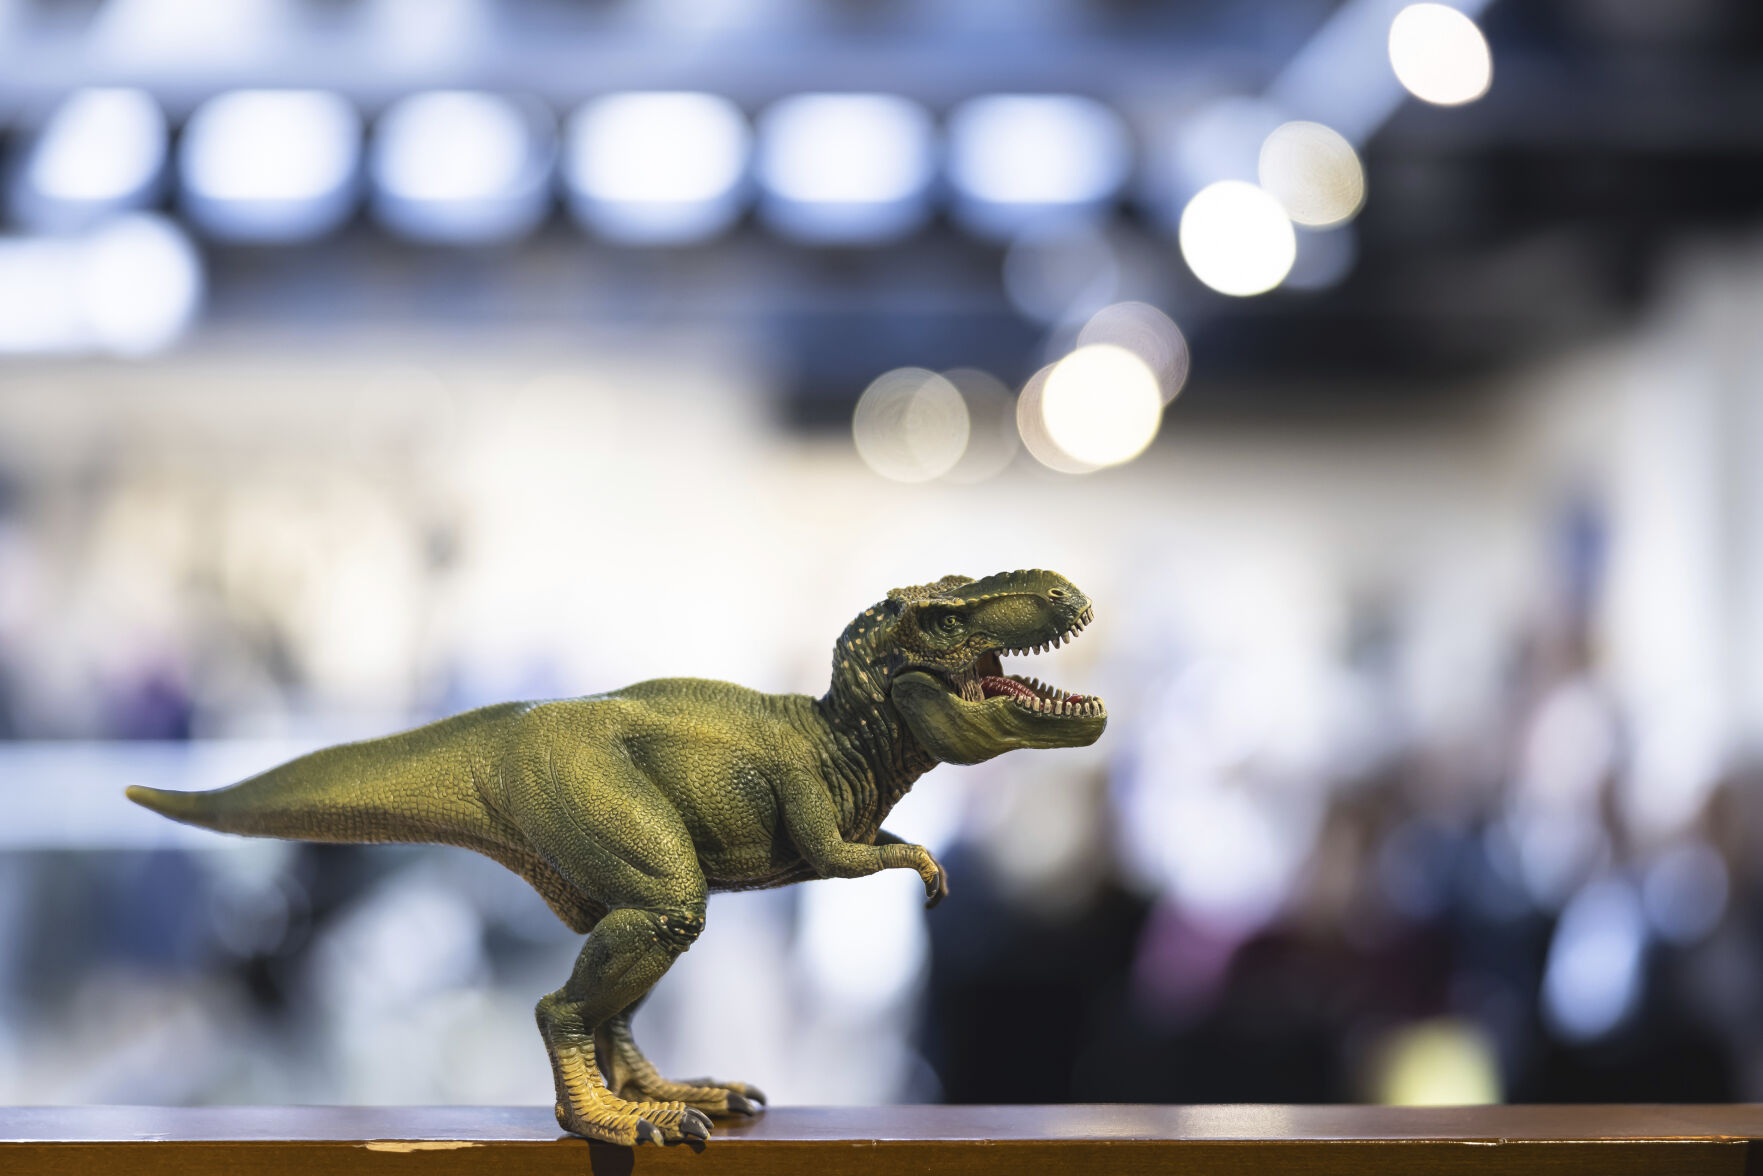 <p>A model of a dinosaur is seen during an auction of auction house Koller, for the skeleton of a Tyrannosaurus rex named Trinity, in Zurich, Switzerland on Tuesday, April 18, 2023. The 293 T. rex bones were assembled into a growling posture that measures 11.6 meters long (38 feet long) and 3.9 meters high (12.8 feet high. The skeleton is expected to fetch 5 million to 8 million Swiss francs ($5.6-$8.9 million). (Michael Buholzer/Keystone via AP)</p>   PHOTO CREDIT: Michael Buholzer - foreign subscriber, Keystone